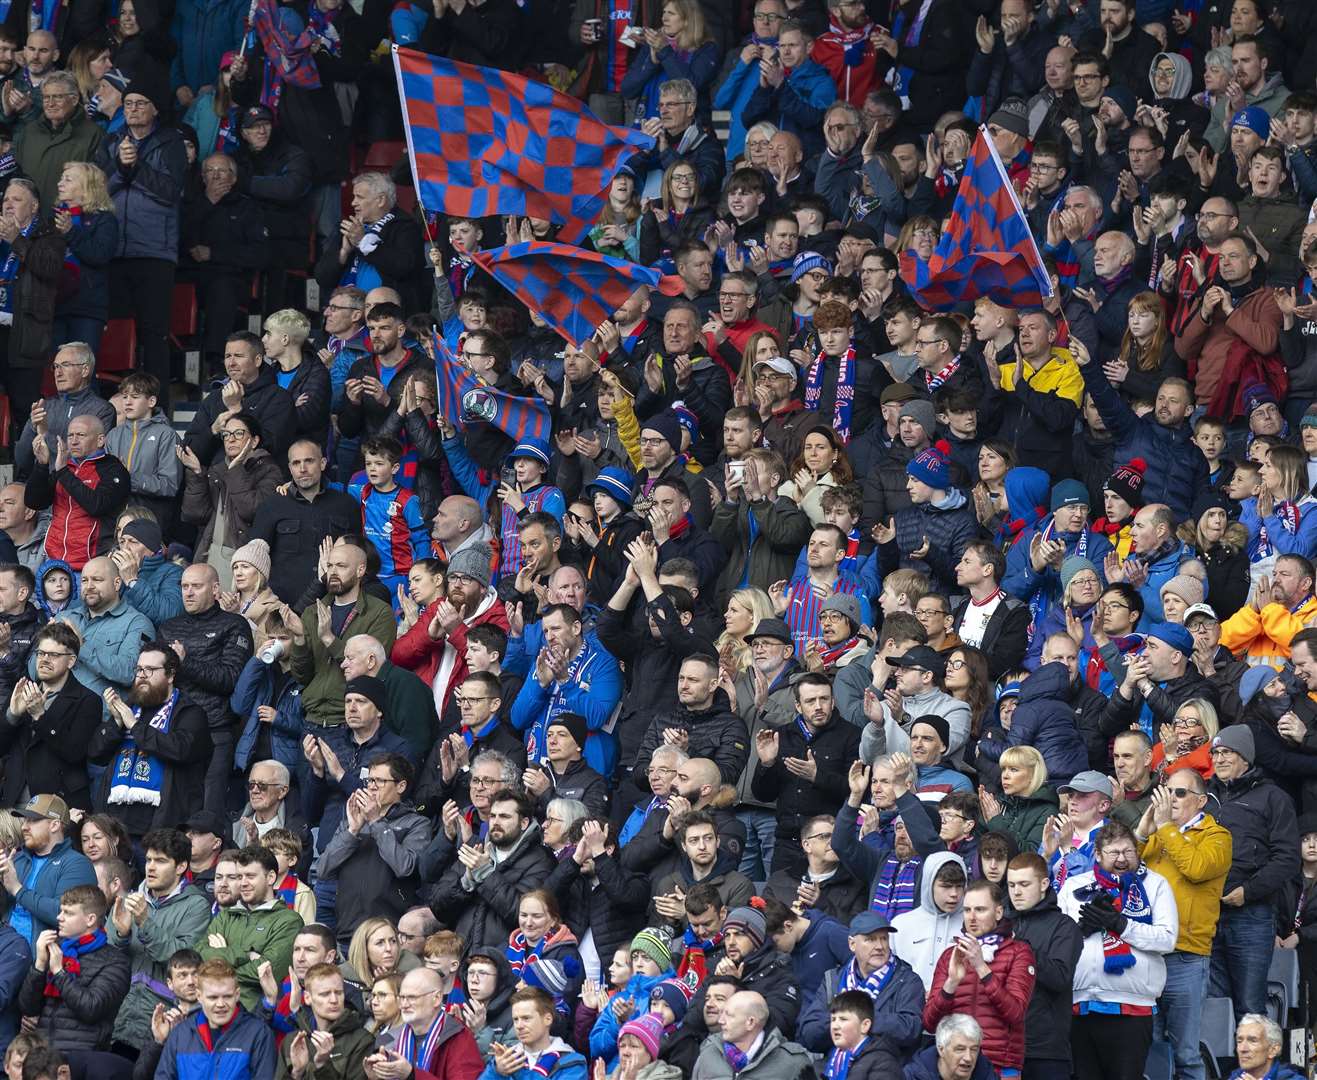 Caley Thistle supporters at the Hampden Park semi-final.